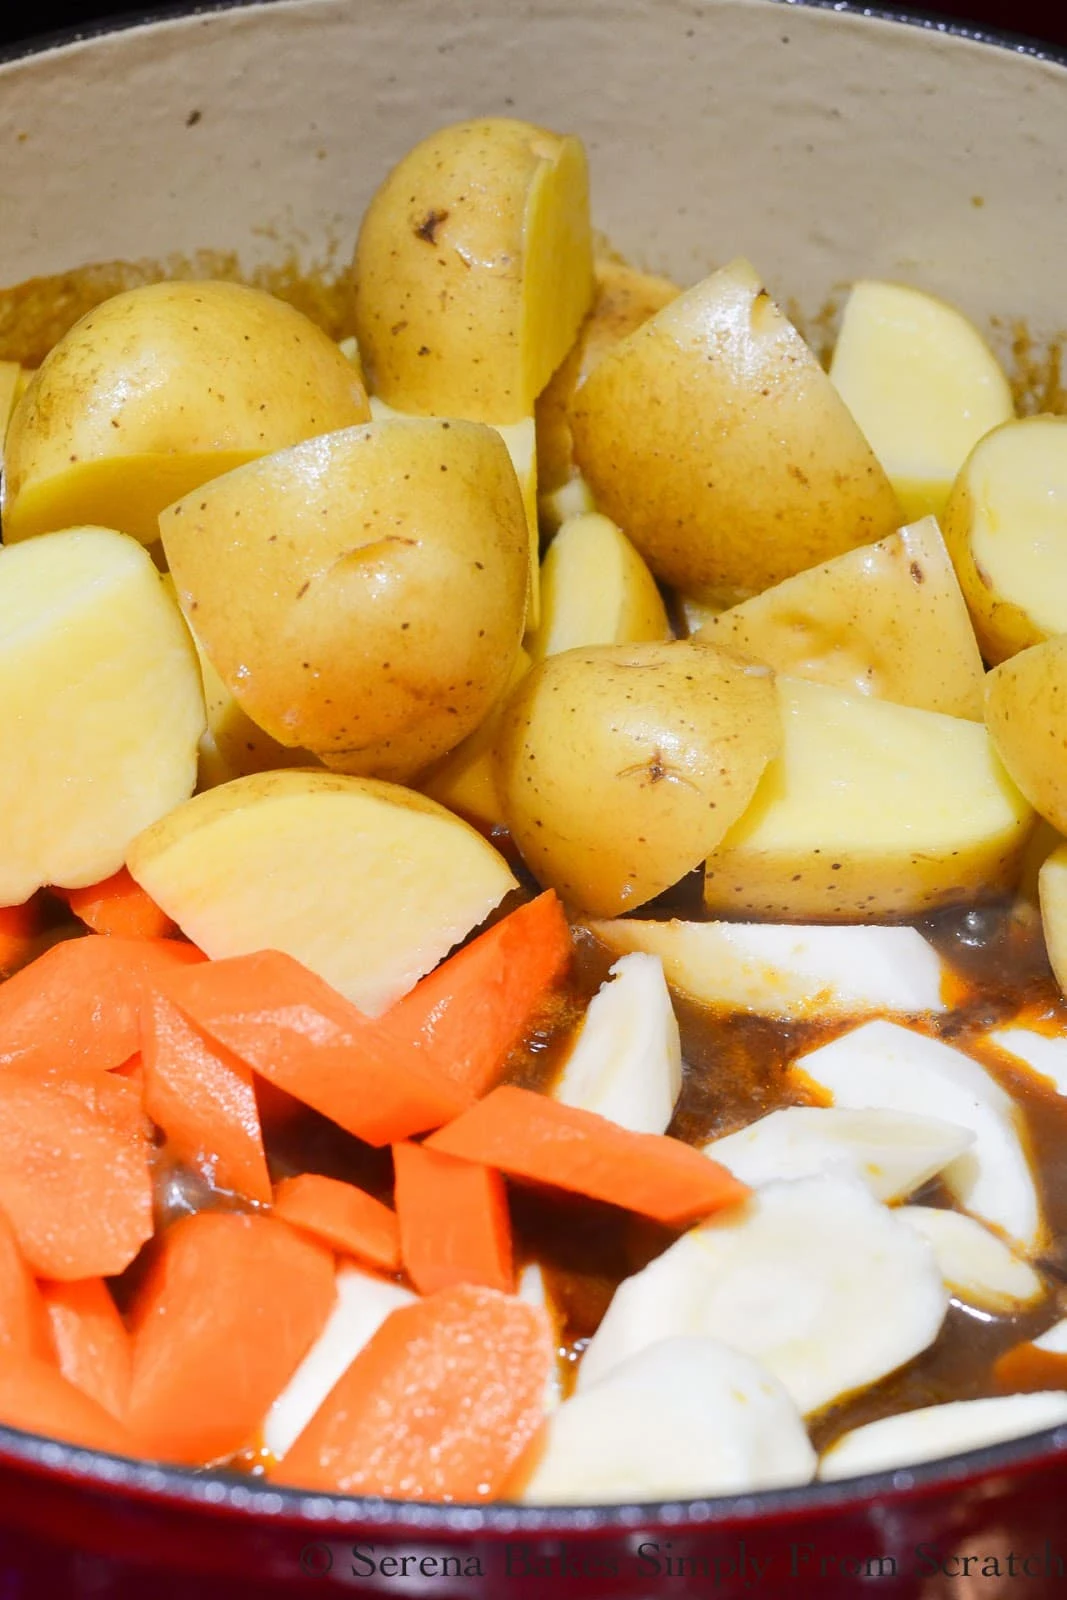 Carrots, yukon gold potatoes, and parsnips added to Guiness Beef Stew recipe.